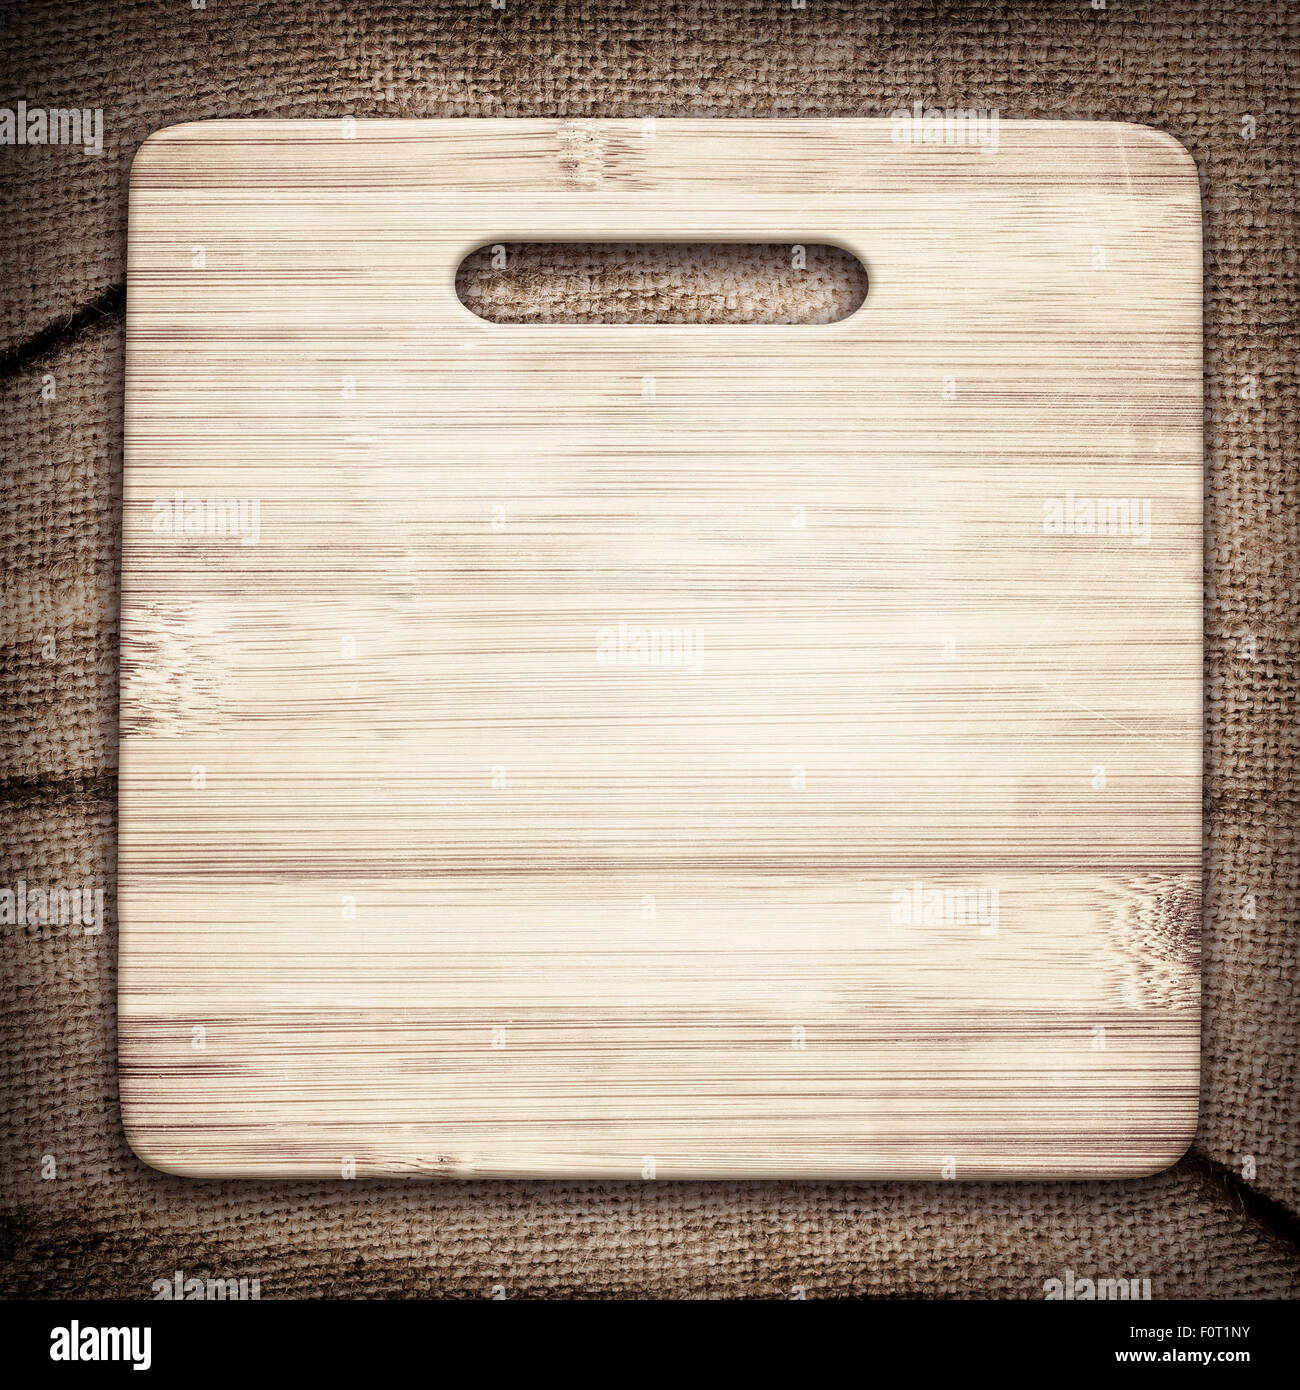 Old cutting board used for cooking on brown crumple burlap tablecloth Stock Photo